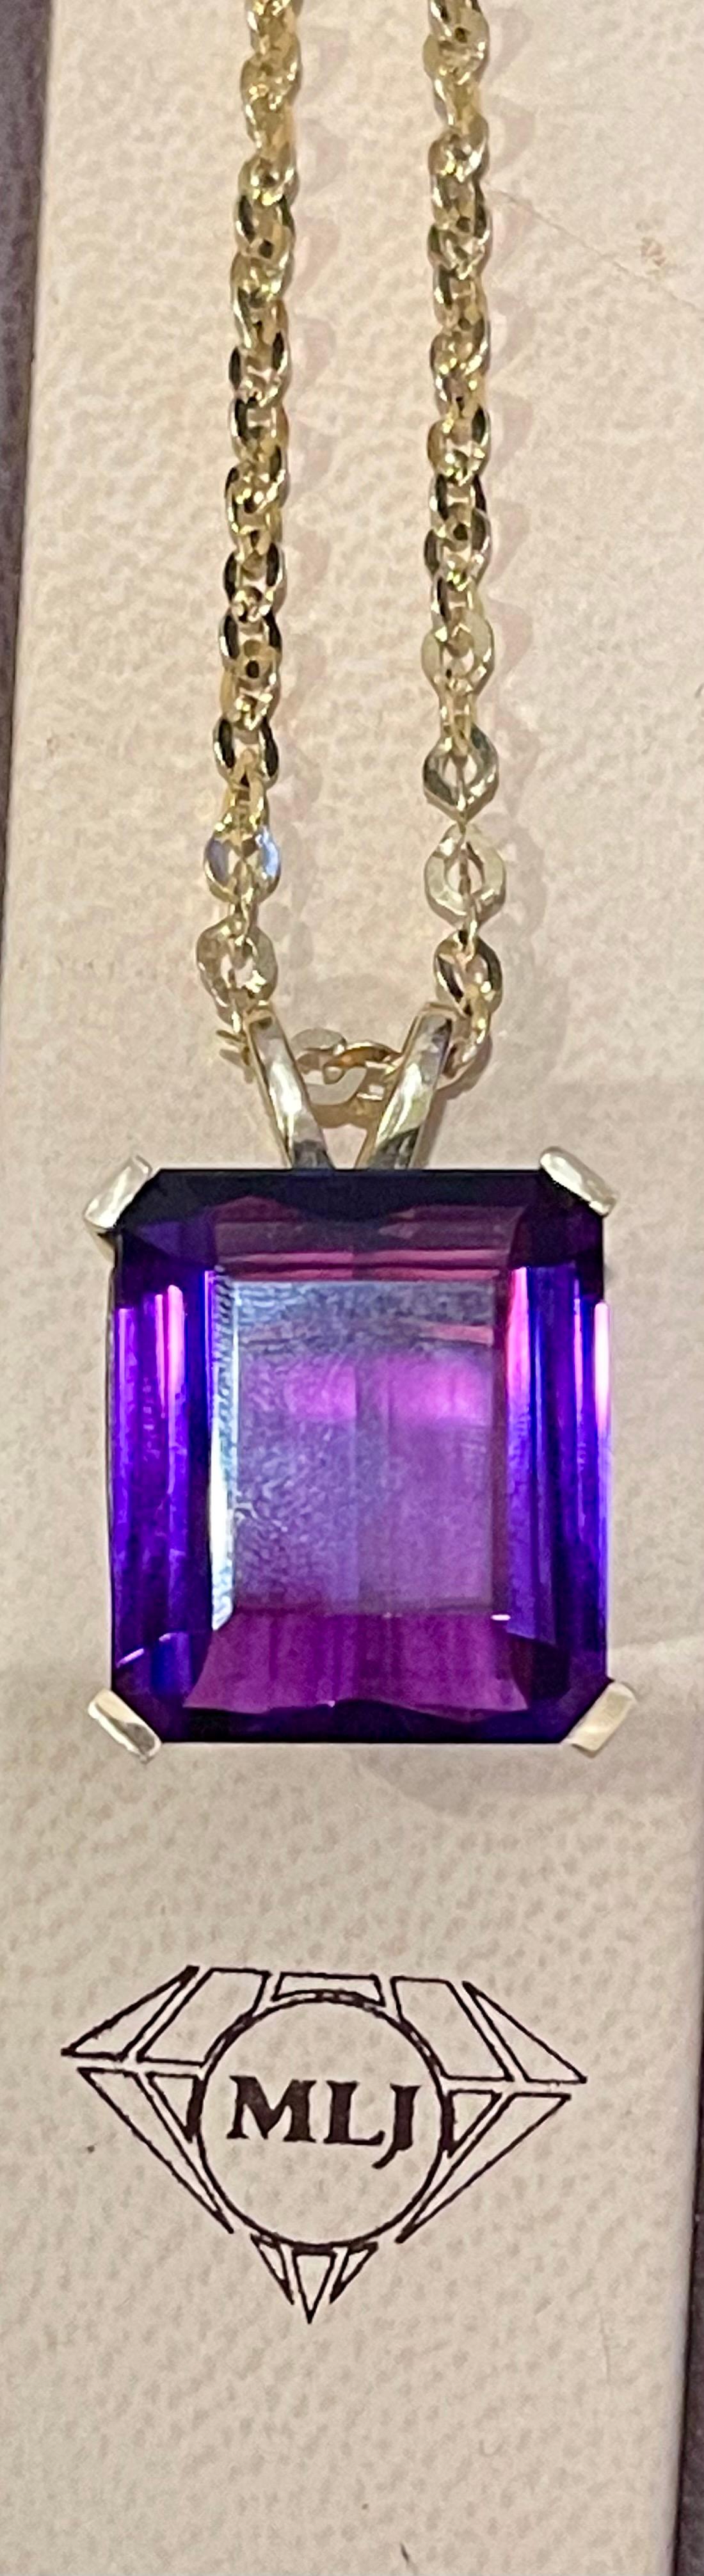 42 Ct Emerald Cut Amethyst Pendant /Necklace + 14 Kt Yellow Gold Chain Vintage 6